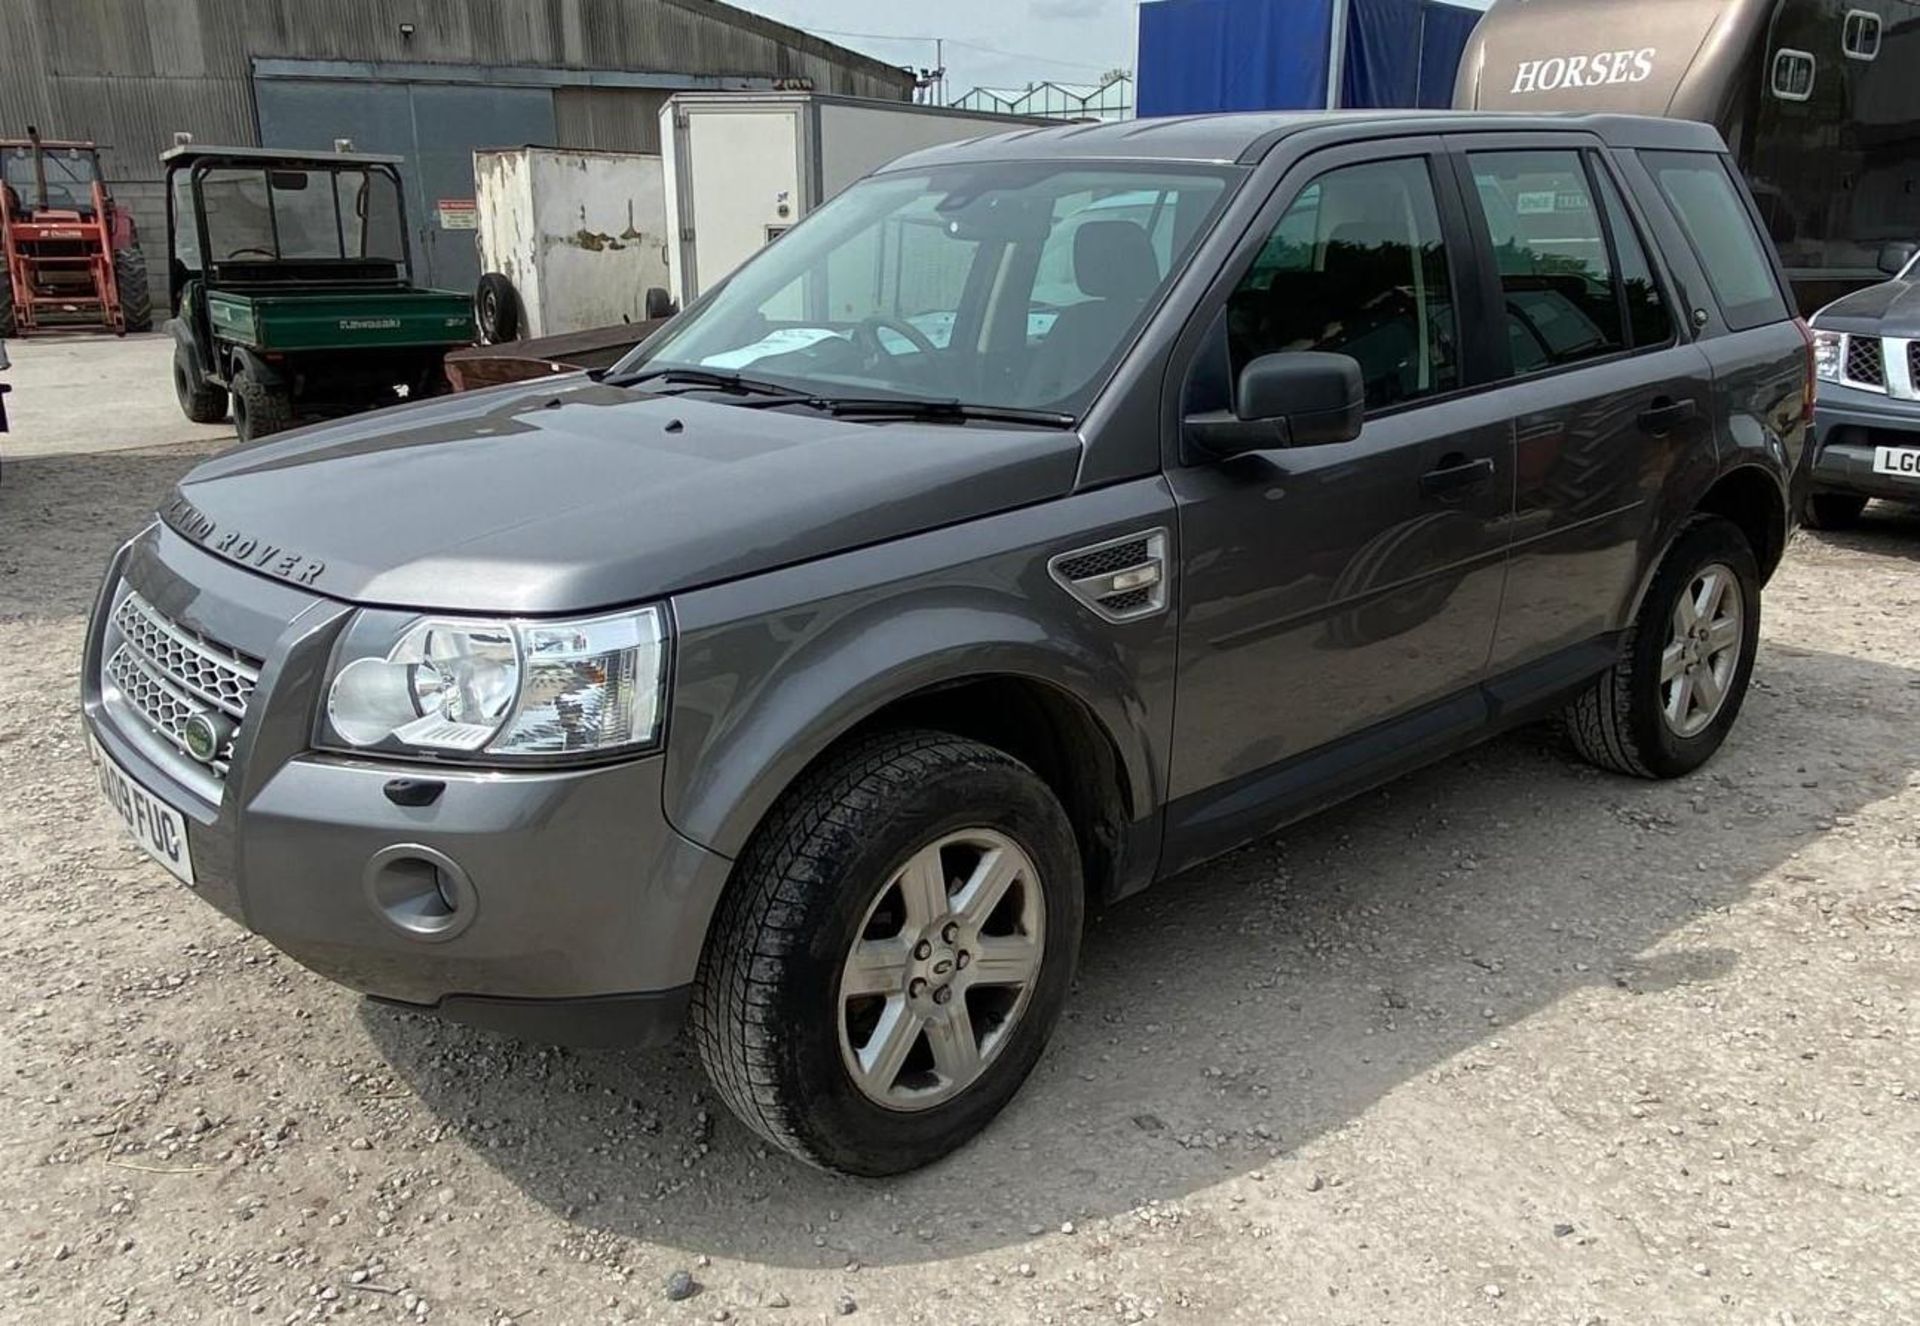 LAND ROVER FREELANDER 2 DA09FUO APPROX 110000 MILES MOT JAN 2025 THE VENDOR STATES IF THE CENTRAL